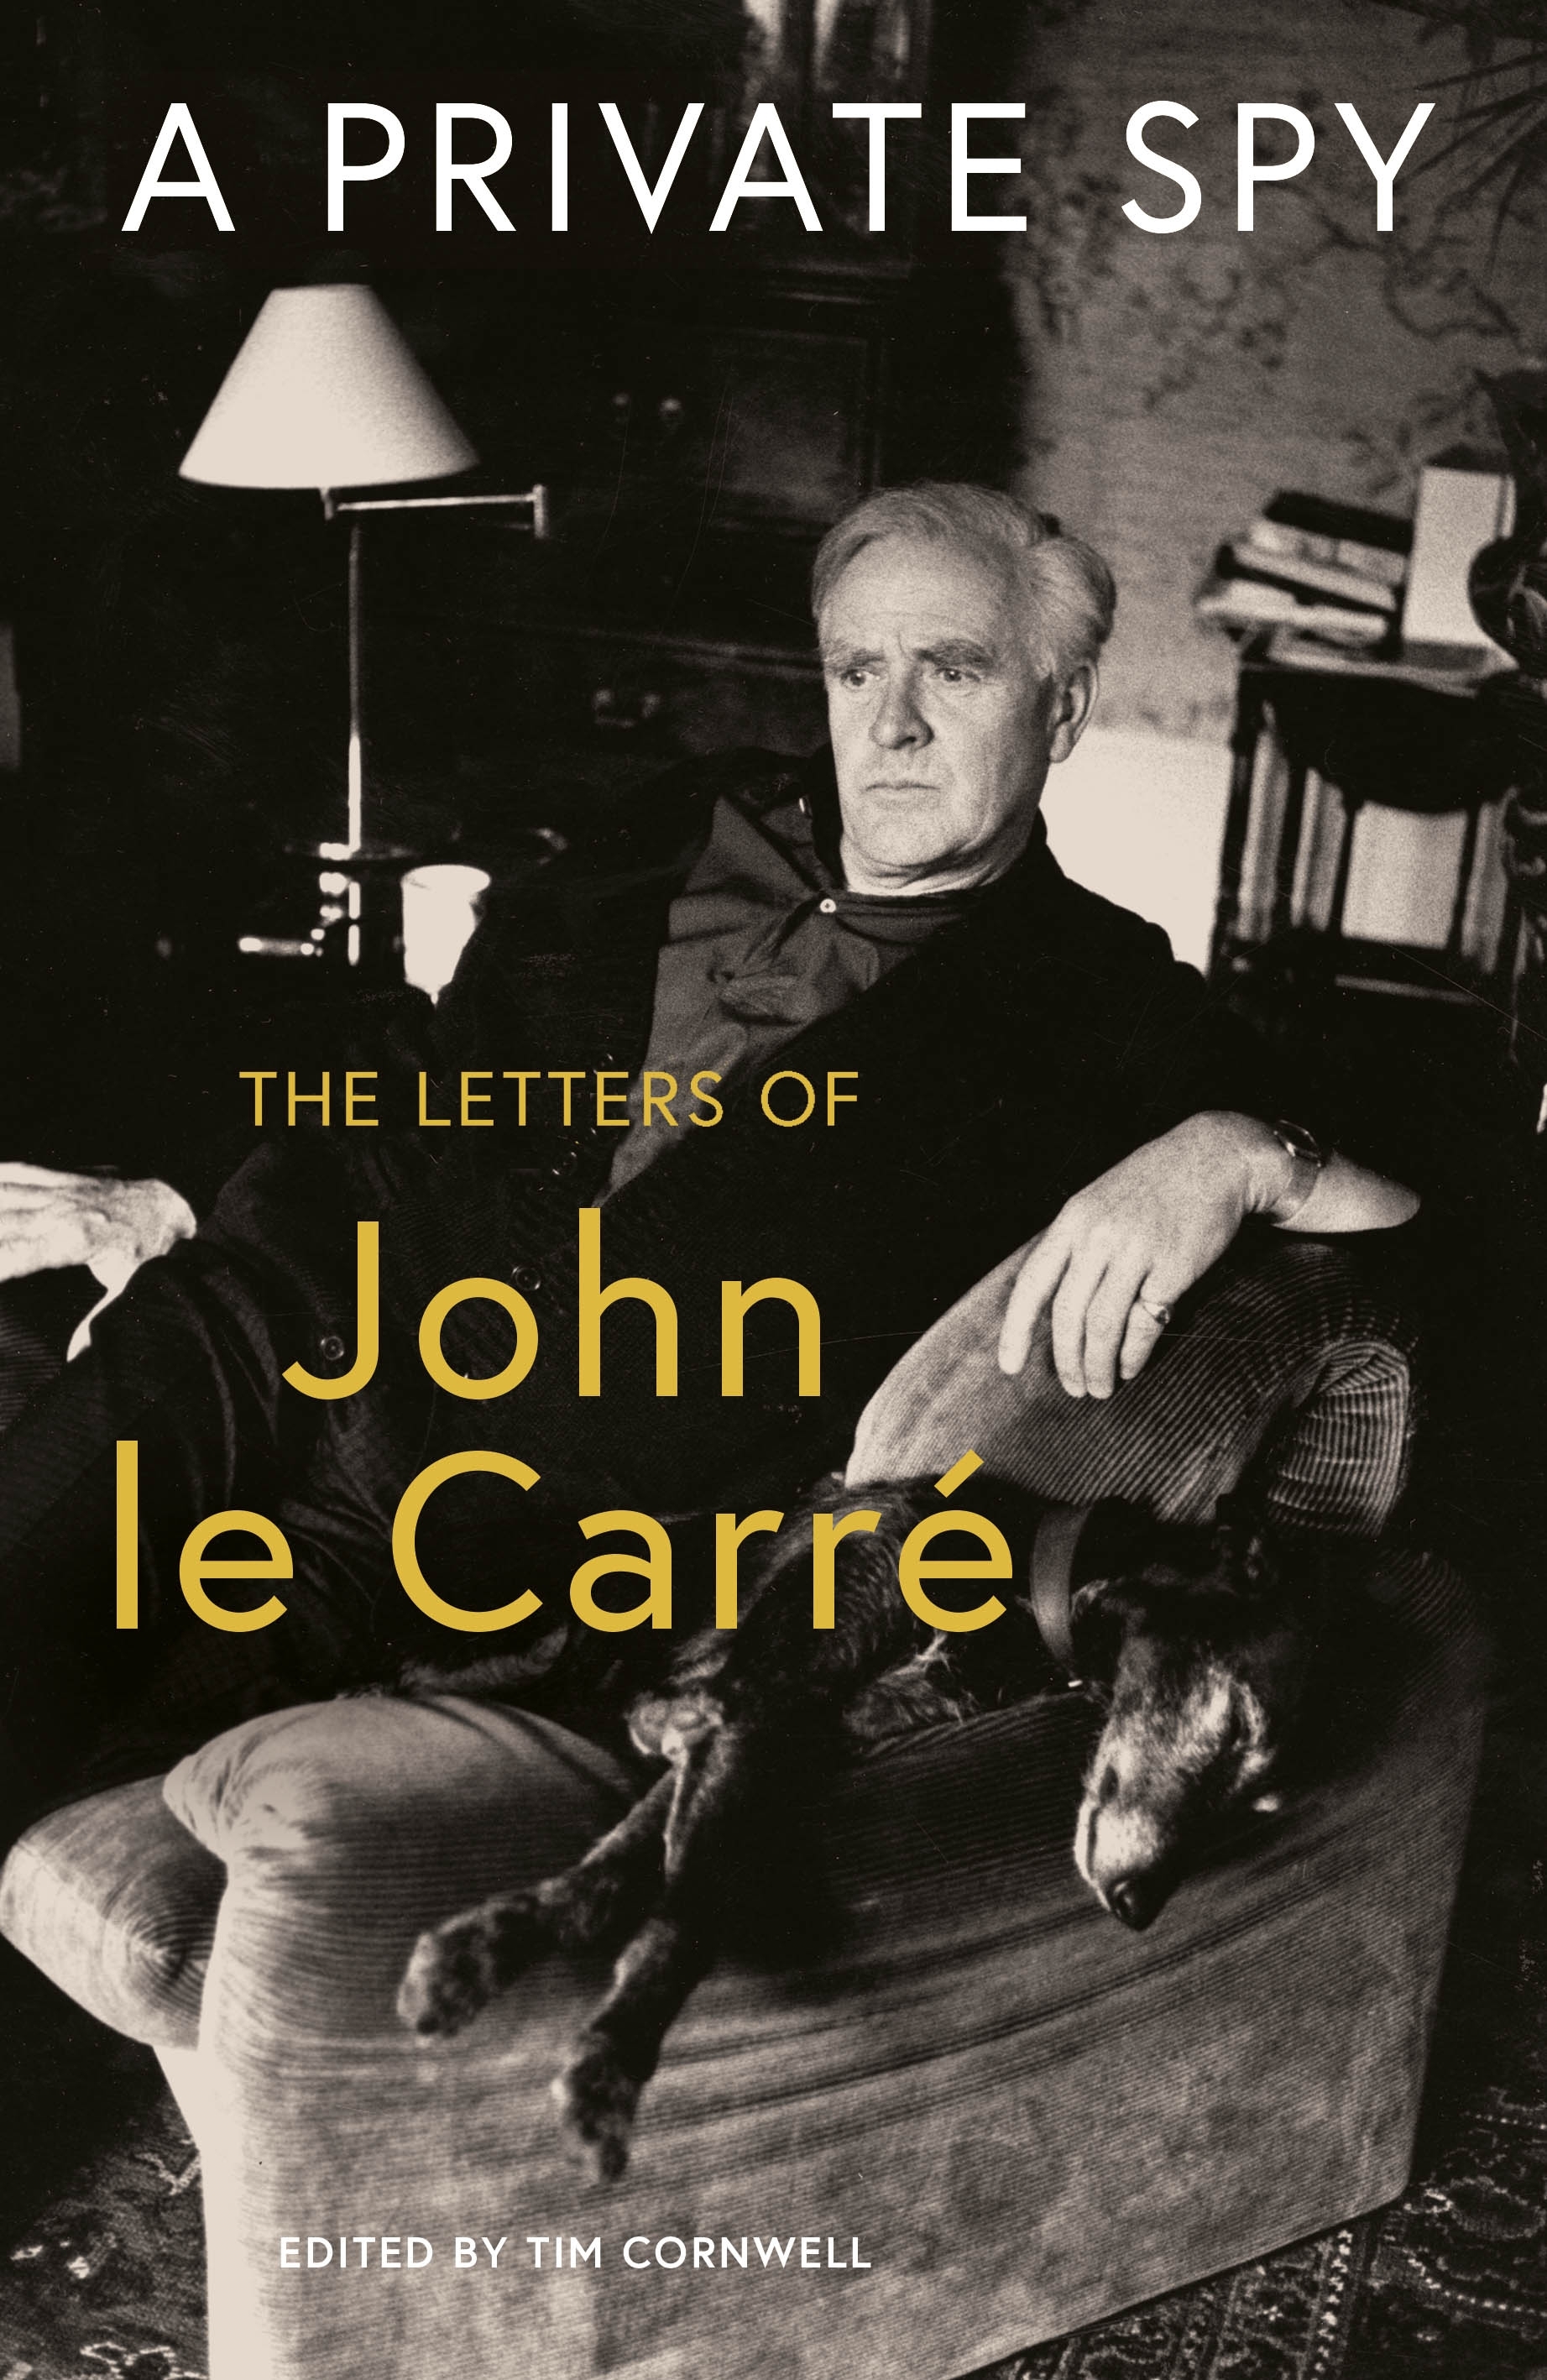 A Private Spy: The letters of John le Carré